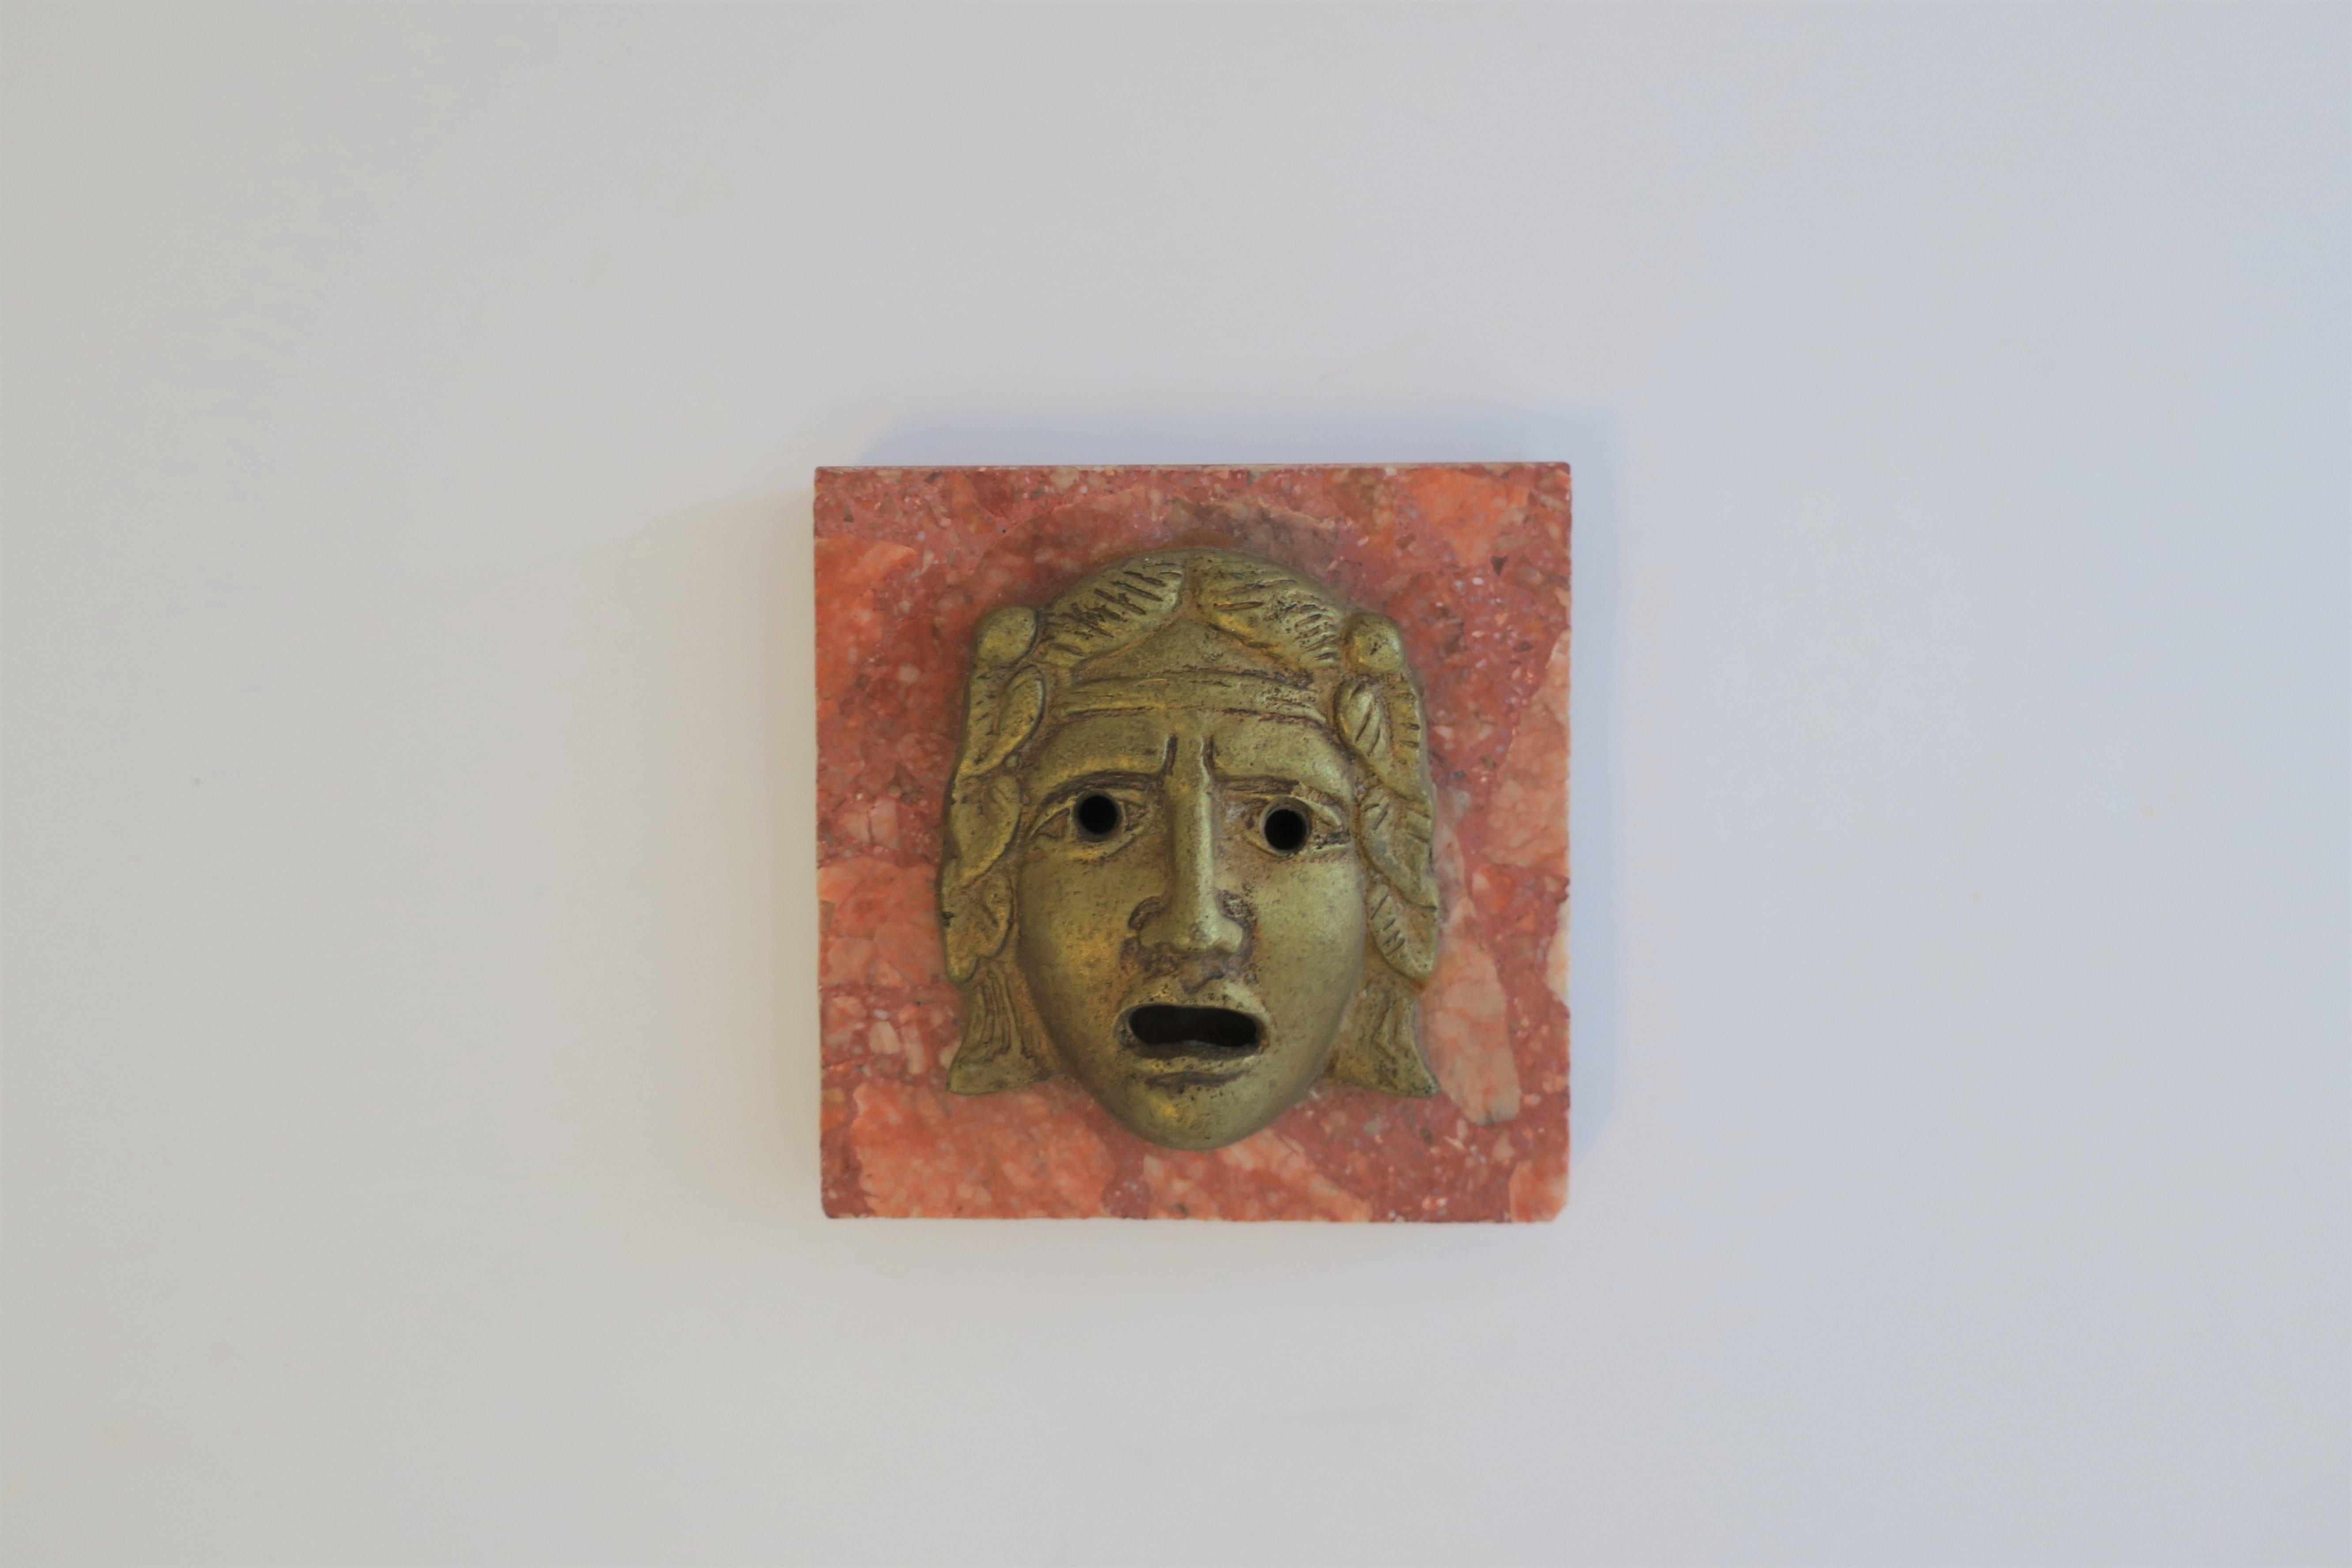 A classical Roman style God or Medusa brass face sculpture on orange/red marble base; beautiful decorative object, paperweight, or deck accessory, circa early - Mid-20th century, Italy. 

Piece measures: 3.88 in. W x 4 in. D x 1.50 in. H

Also